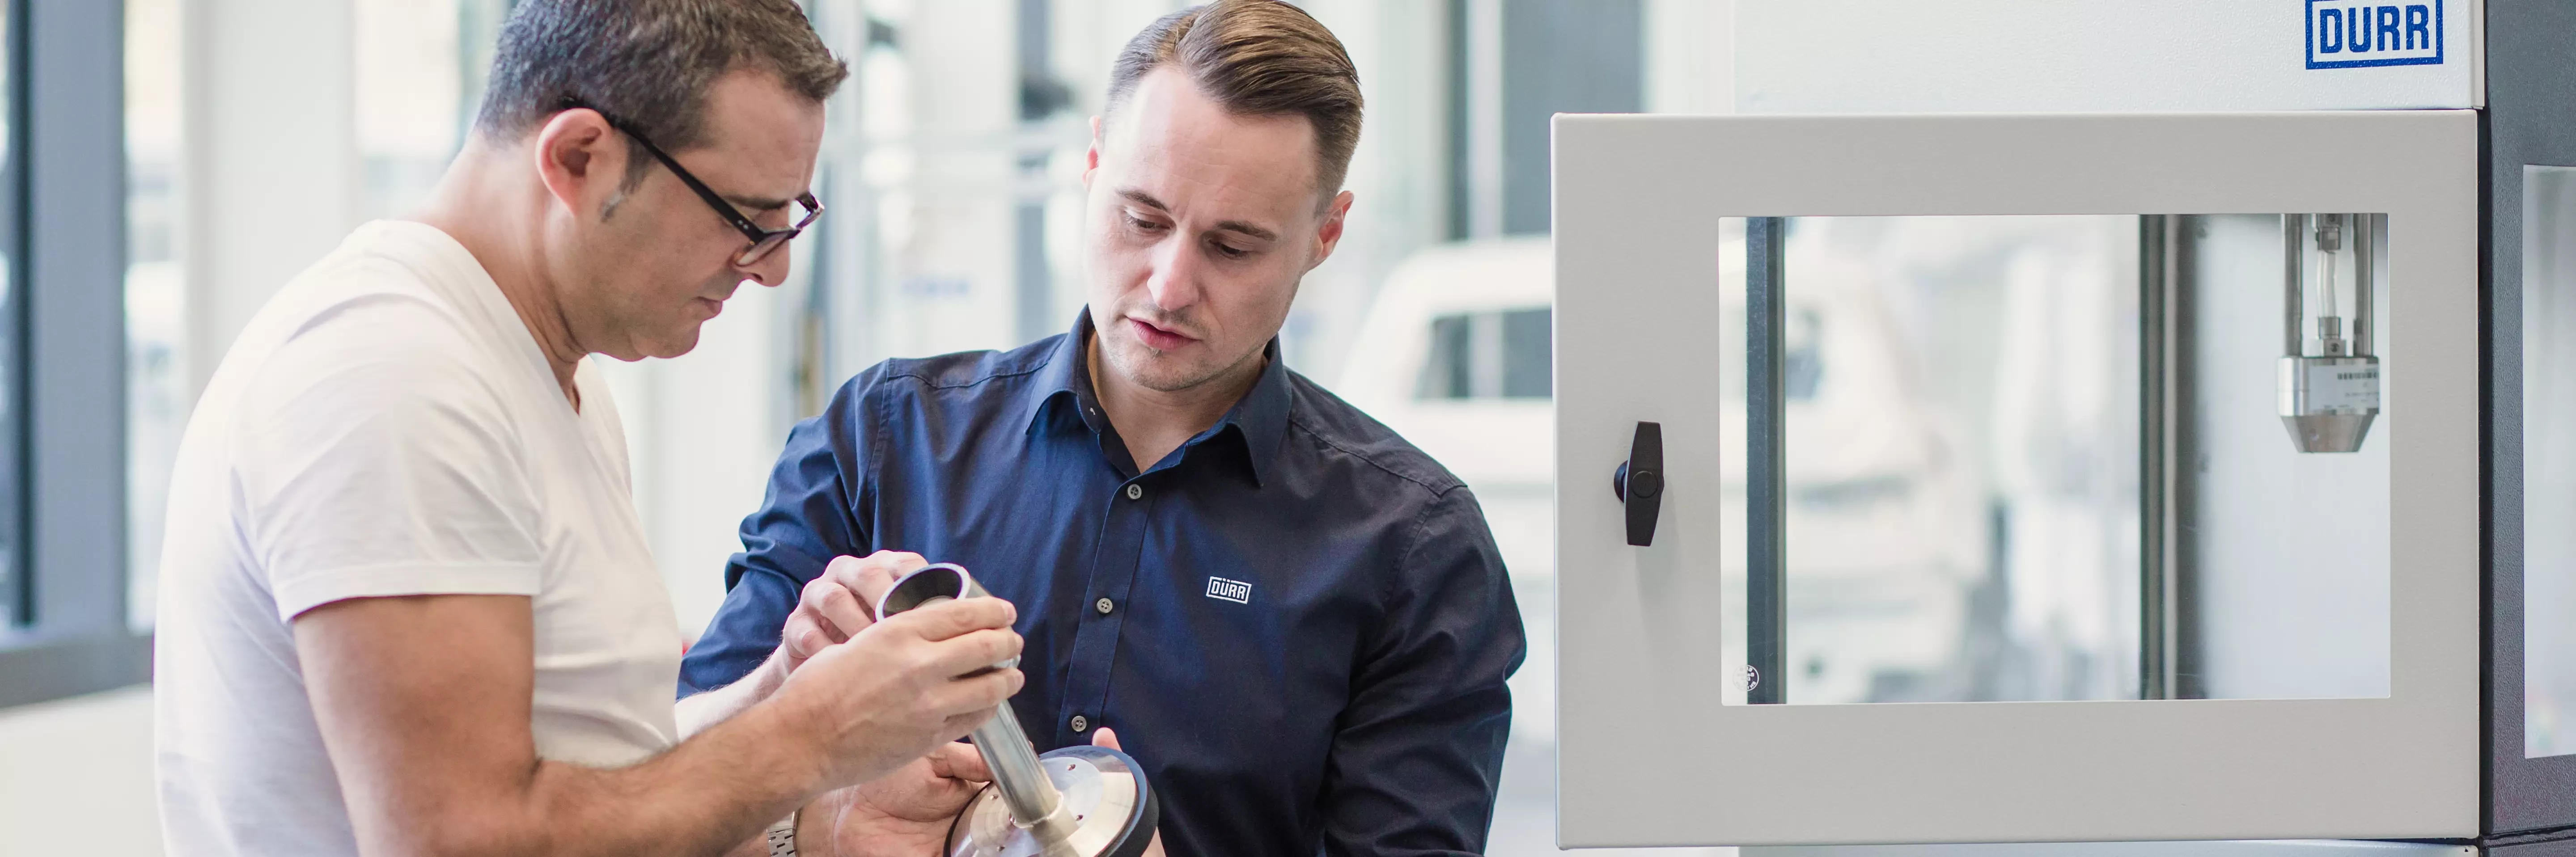 Dürr Training in Bietigheim Bissingen and precise exploration of products